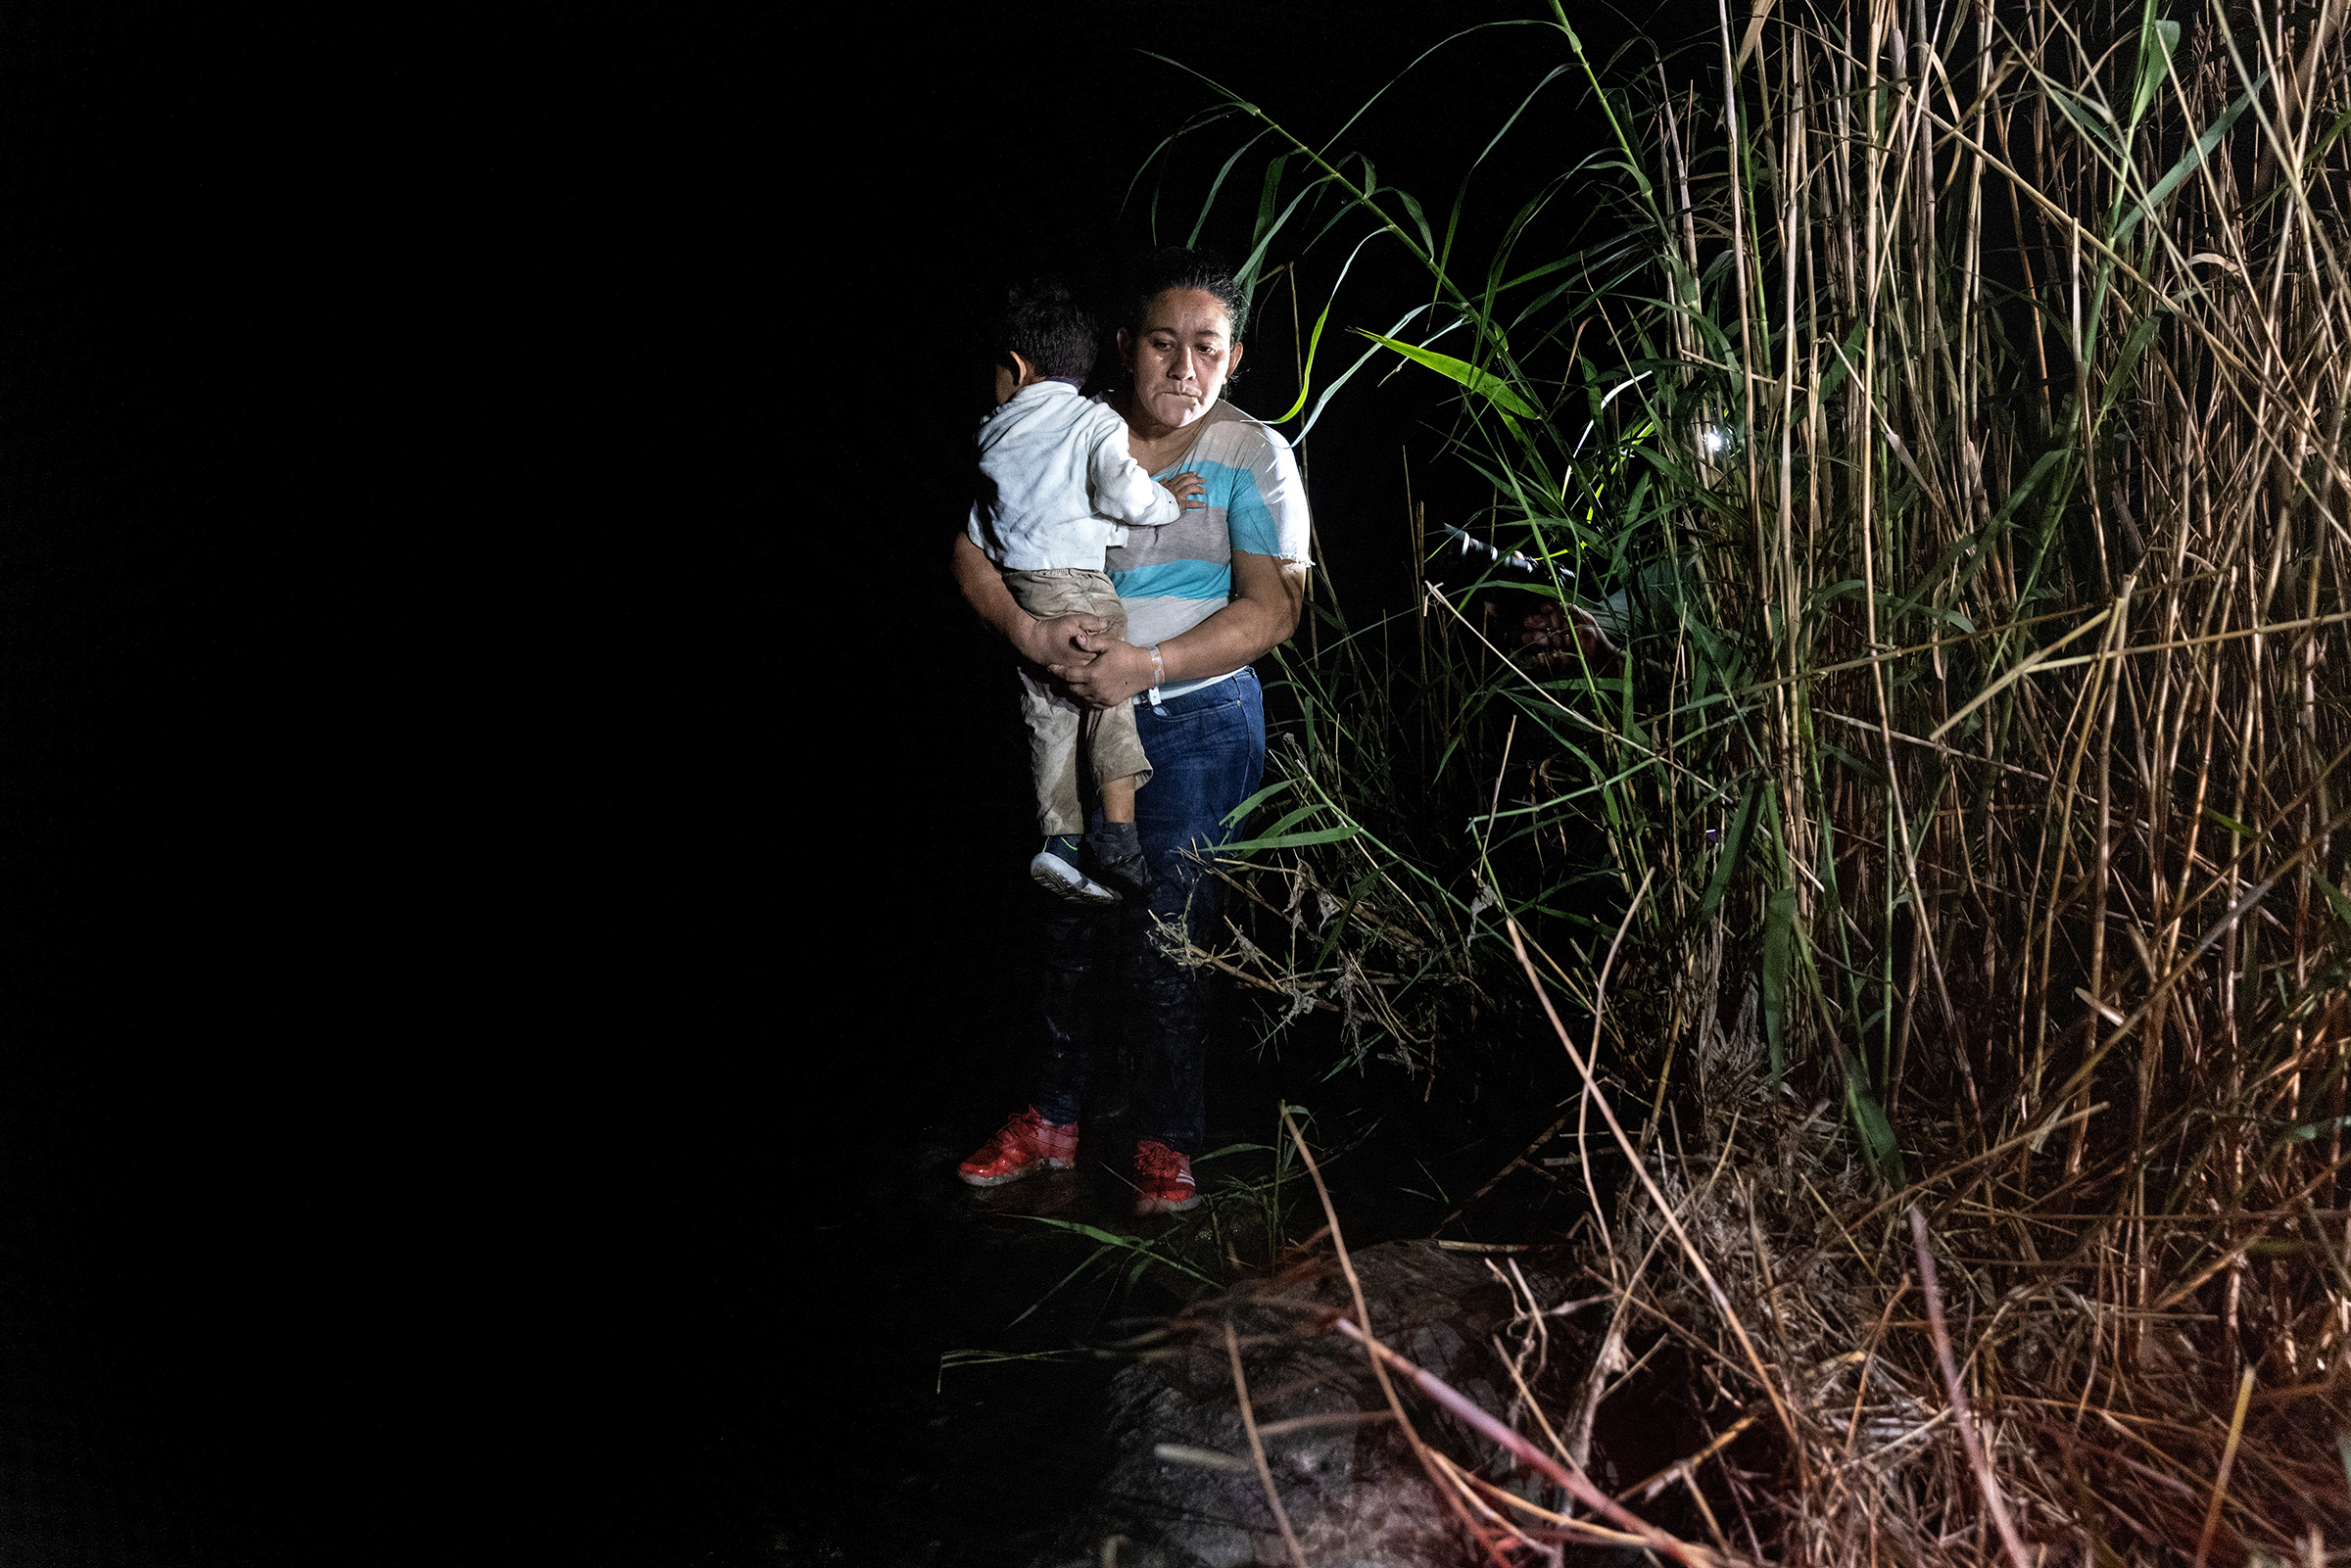 A mother holds her son on the bank of the Rio Grande in Roma, Texas, after being smuggled across the U.S.-Mexico border on April 14, 2021. (John Moore—Getty Images)